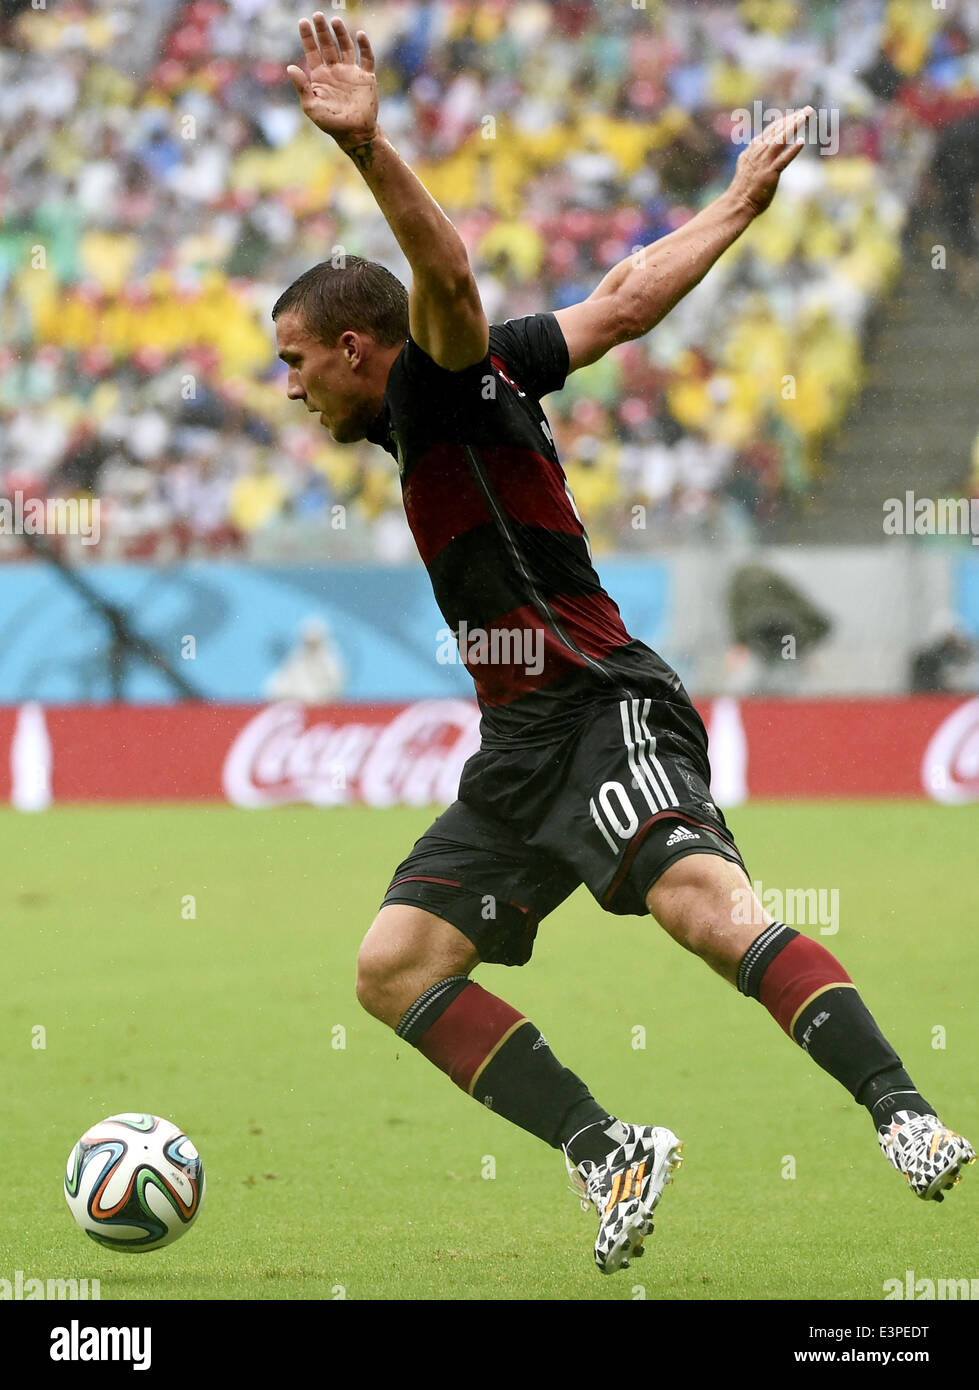 Recife, Brazil. 26th June, 2014. Germany's Lukas Podolski controls the ball during a Group G match between the U.S. and Germany of 2014 FIFA World Cup at the Arena Pernambuco Stadium in Recife, Brazil, on June 26, 2014. Credit:  Lui Siu Wai/Xinhua/Alamy Live News Stock Photo